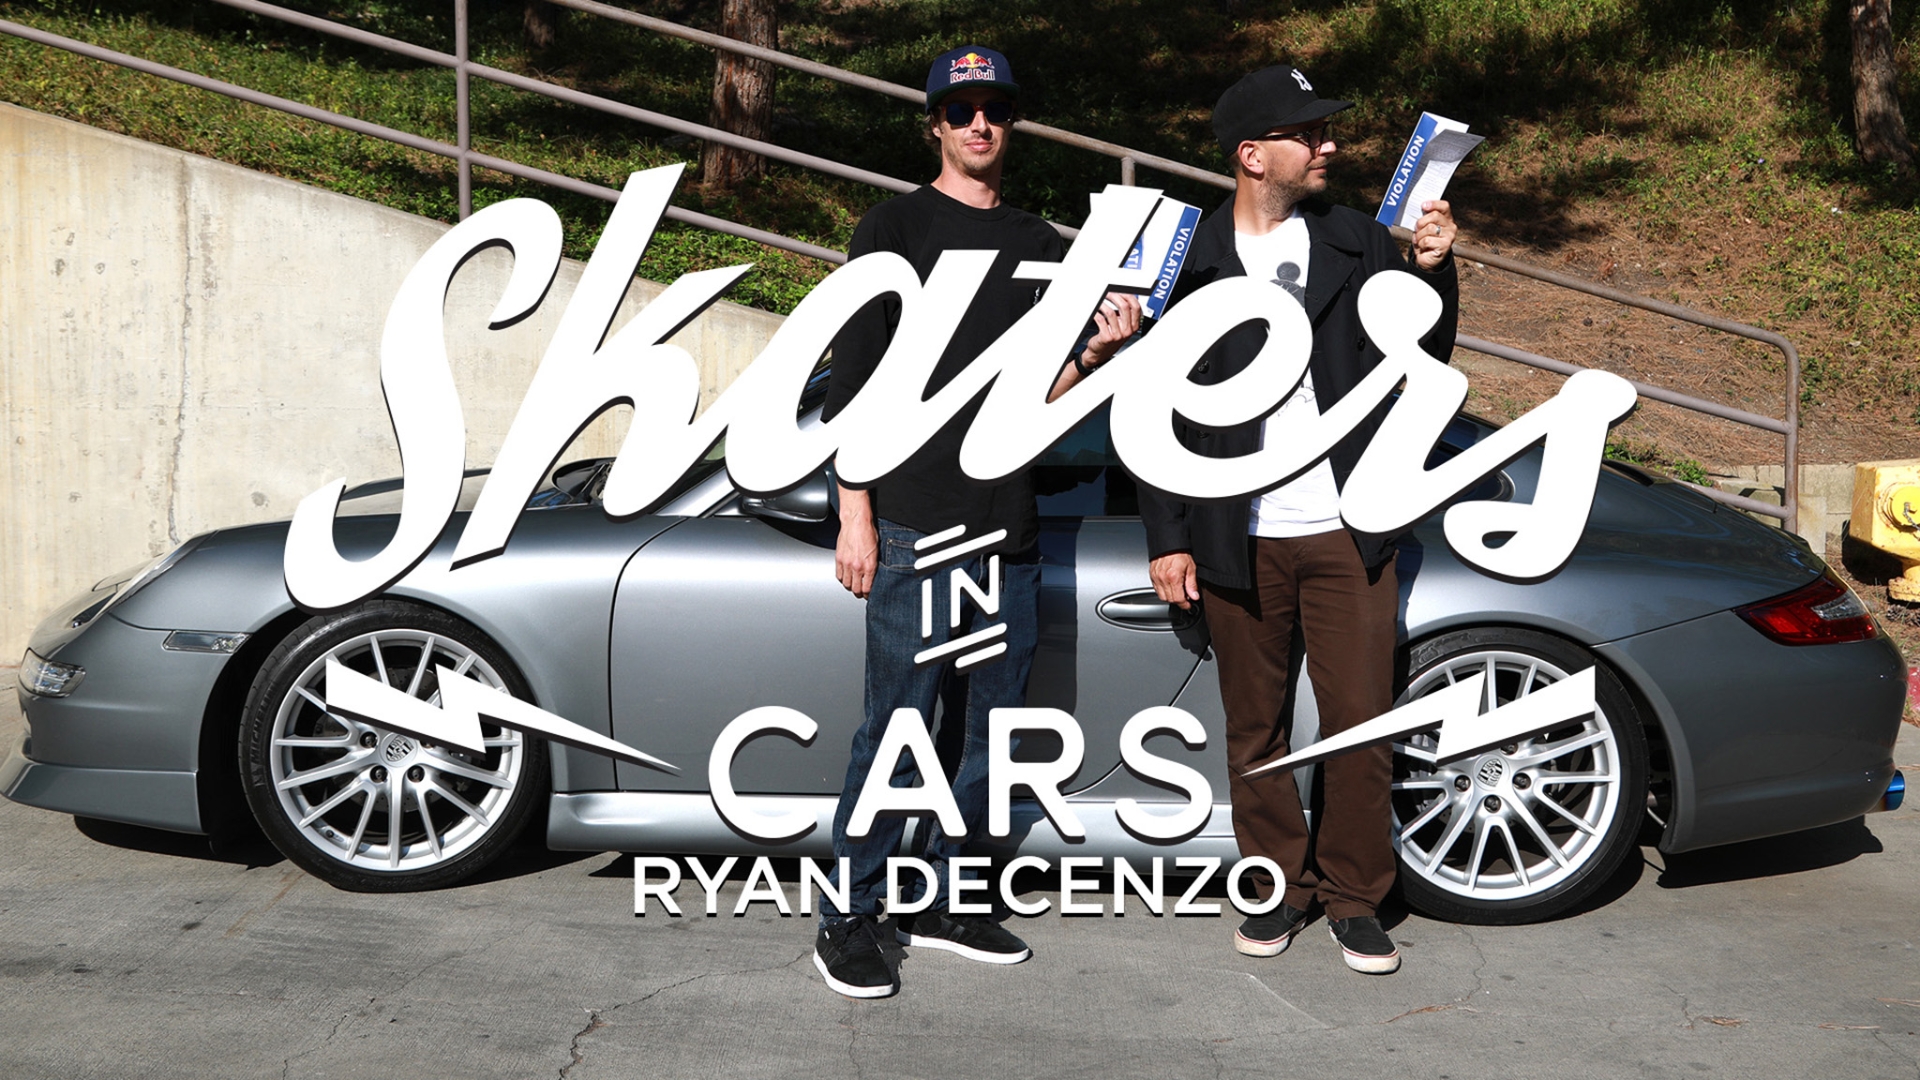 Skaters In Cars Looking At Spots: Ryan DeCenzo